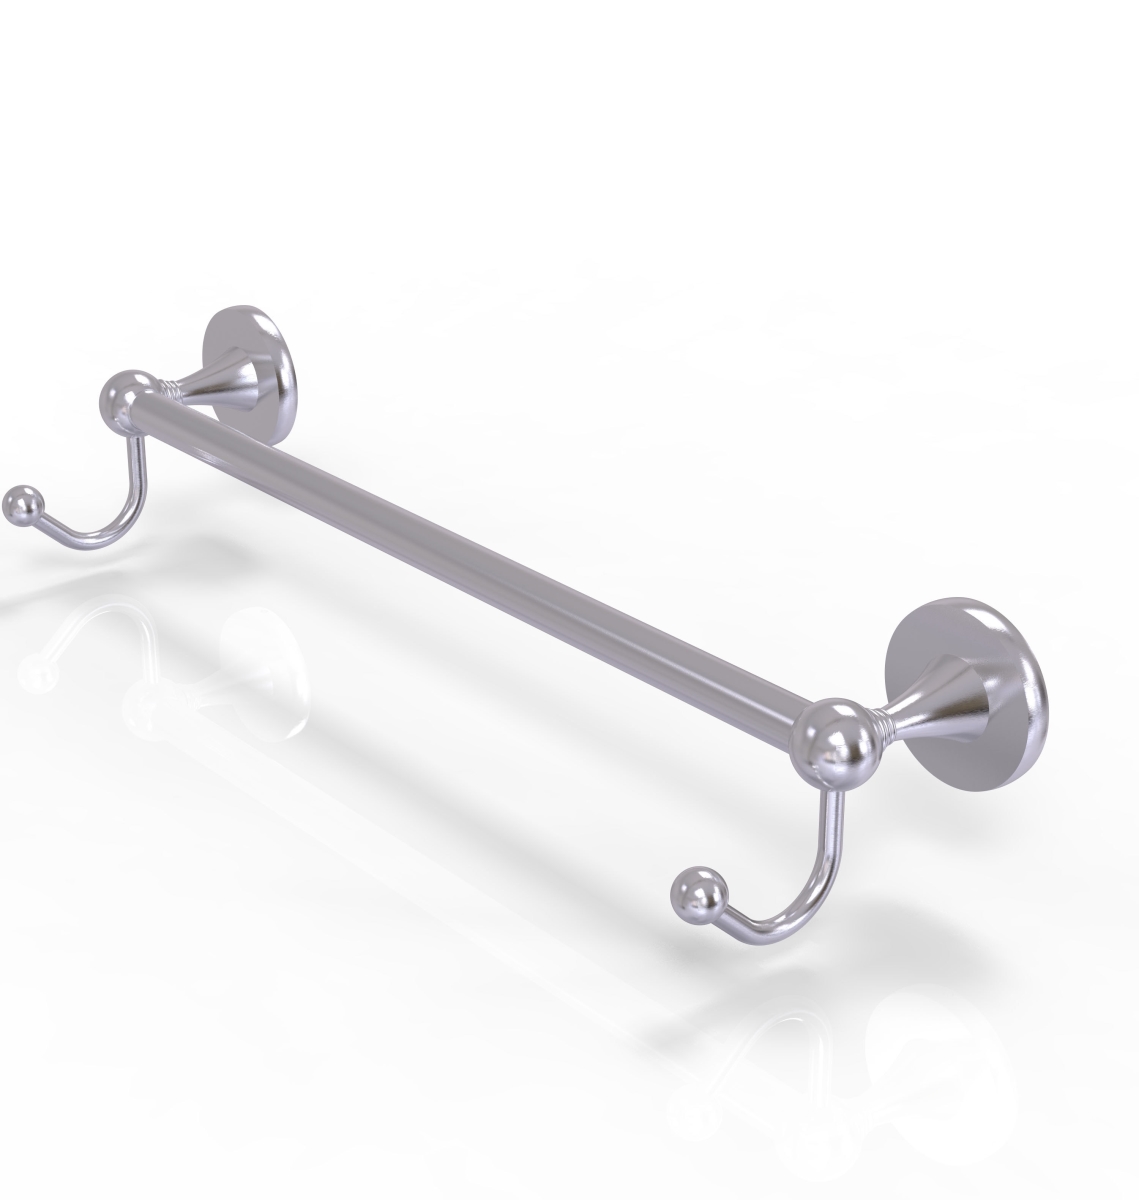 Allied Brass SL-41-36-HK-SCH 36 in. Shadwell Collection Towel Bar with Integrated Hooks, Satin Chrome - 4.5 x 6 x 38.25 in.